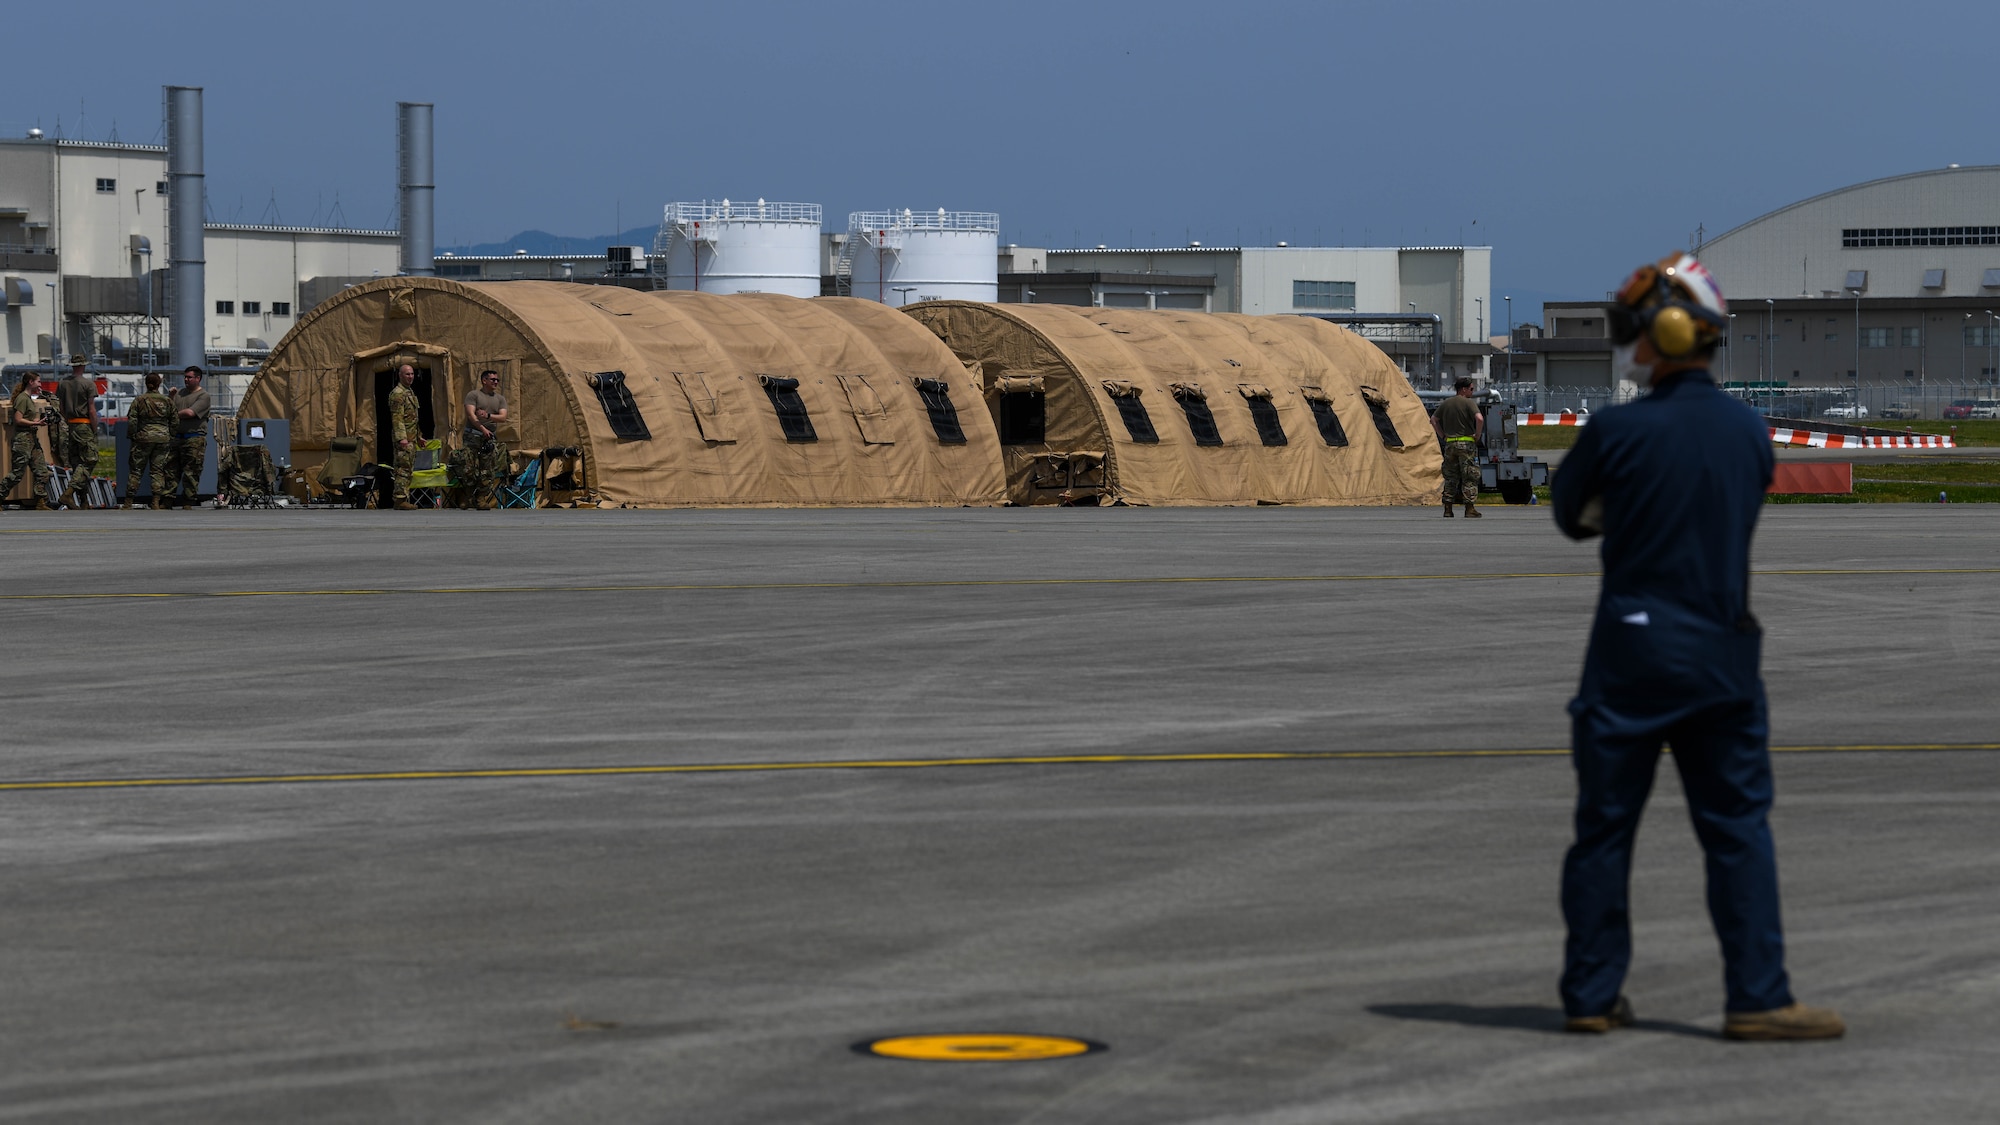 Airmen assigned to Yokota Air Base stand next to two forward operating base tents on a flightline at Marine Corps Air Station Iwakuni, Japan, April 19, 2022. FOB tactical planning proficiency was part of the agile combat employment training objectives for this training event. (U.S. Air Force photo by Staff Sgt. Jessica Avallone)